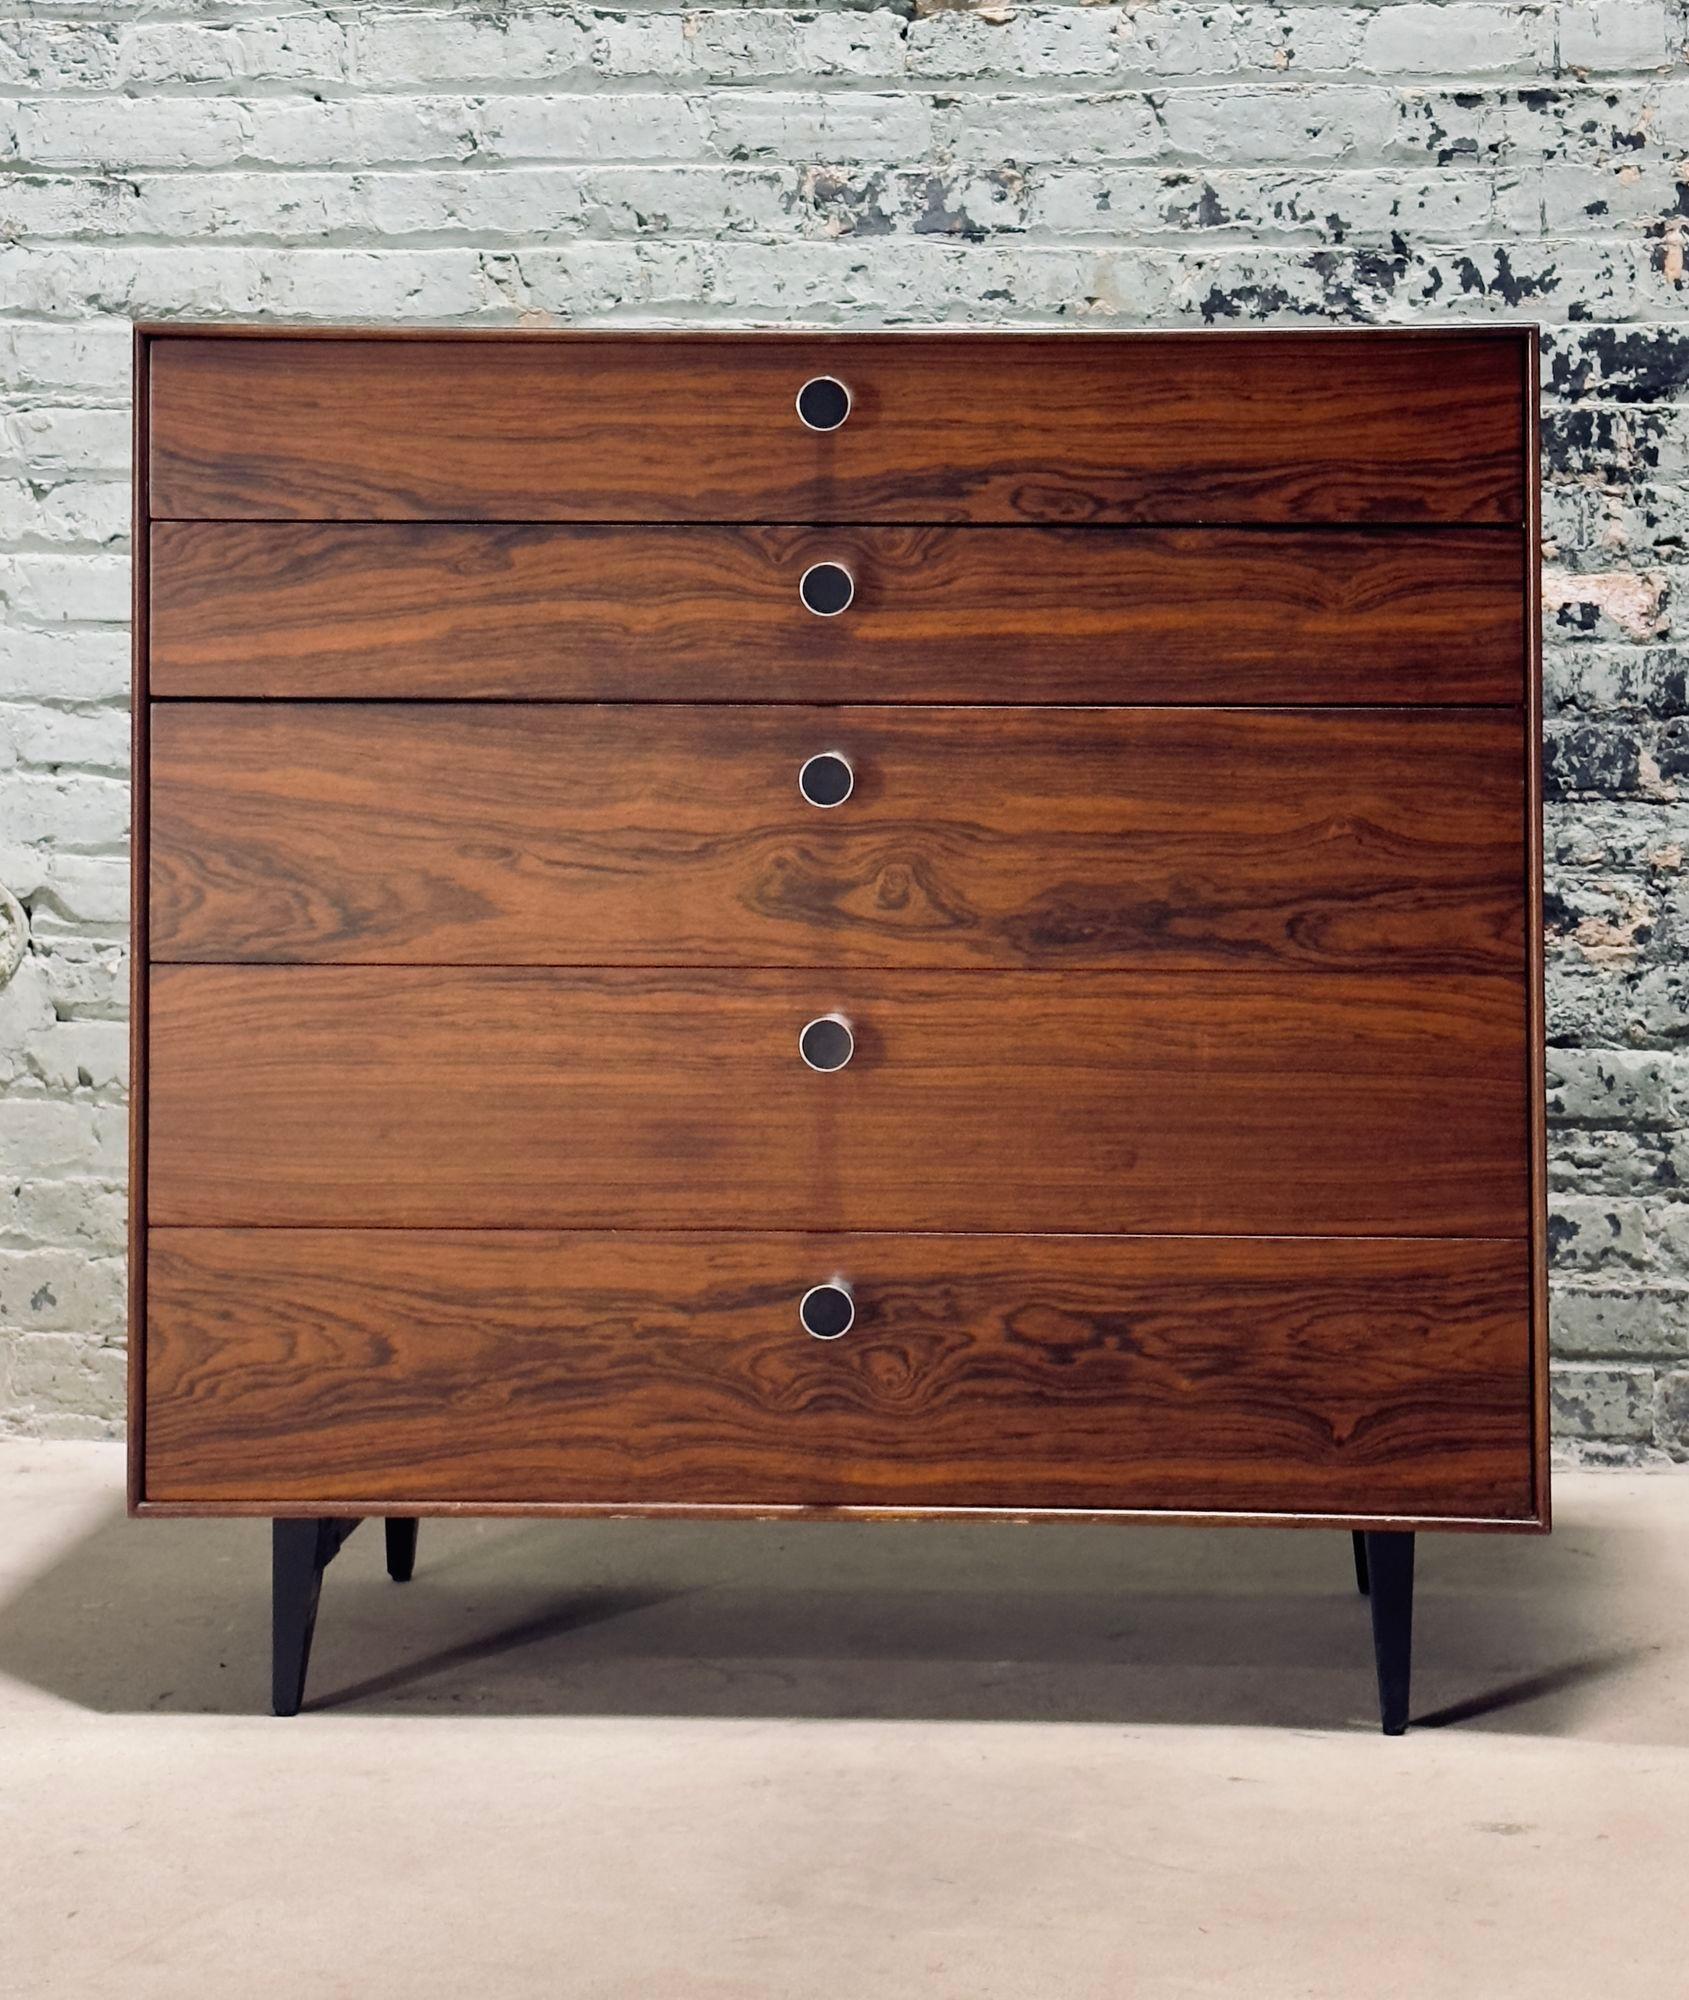 George Nelson thin edge for Herman Miller Rosewood 5 drawer Dresser, 1950. Restored and absolutely beautiful.
The other dresser and pair nightstands is sold in separate listing.
Measure 39.5